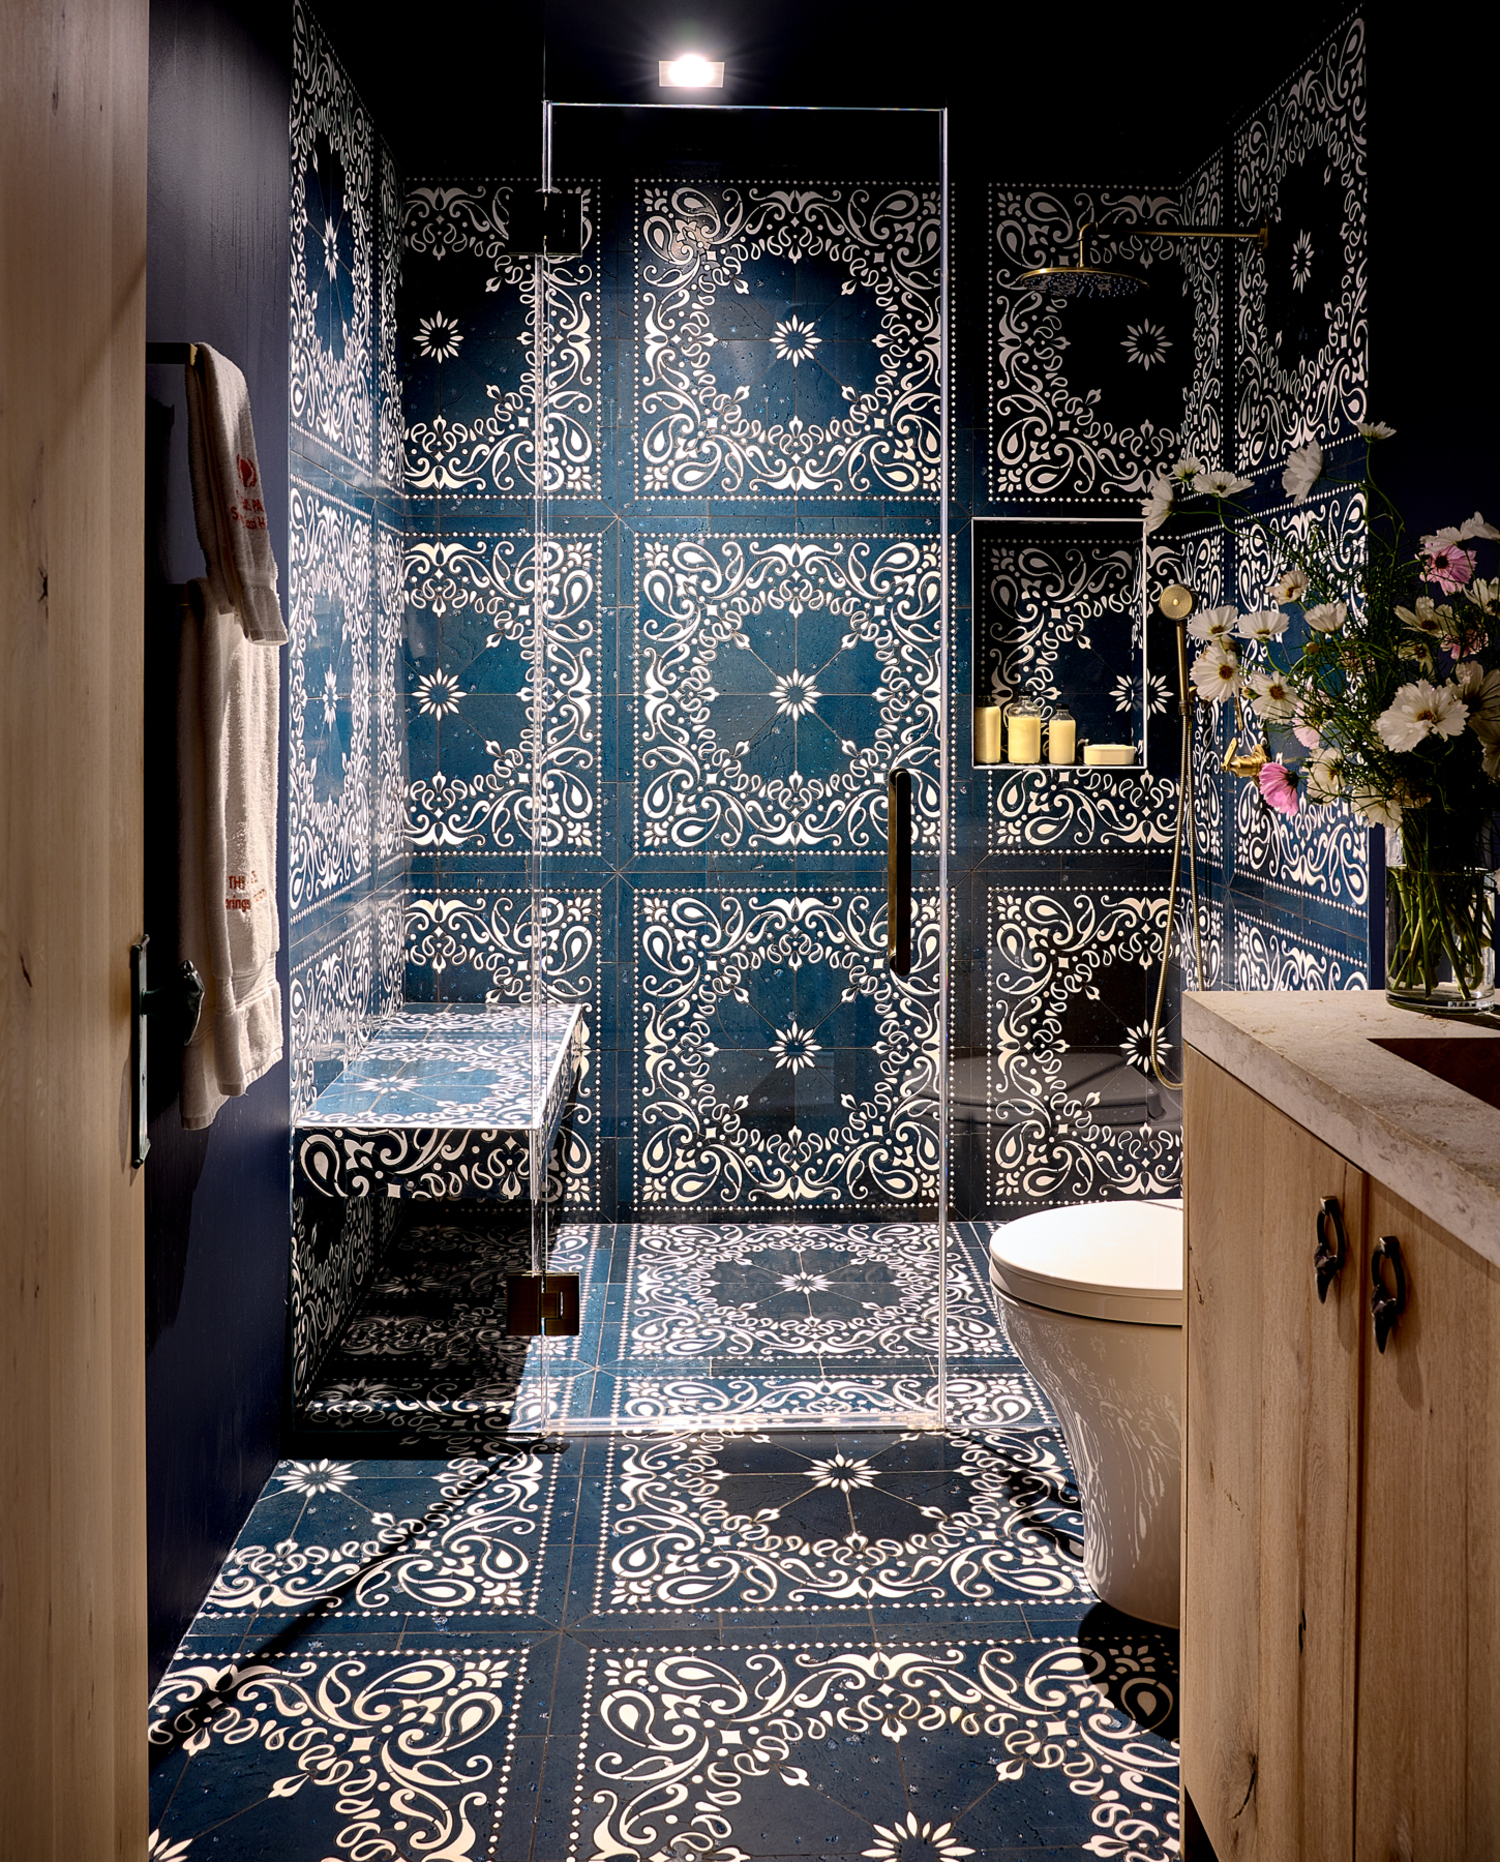 An exploded bandana motif adds a wow factor to the guest bath. WILLIAM WALDRON